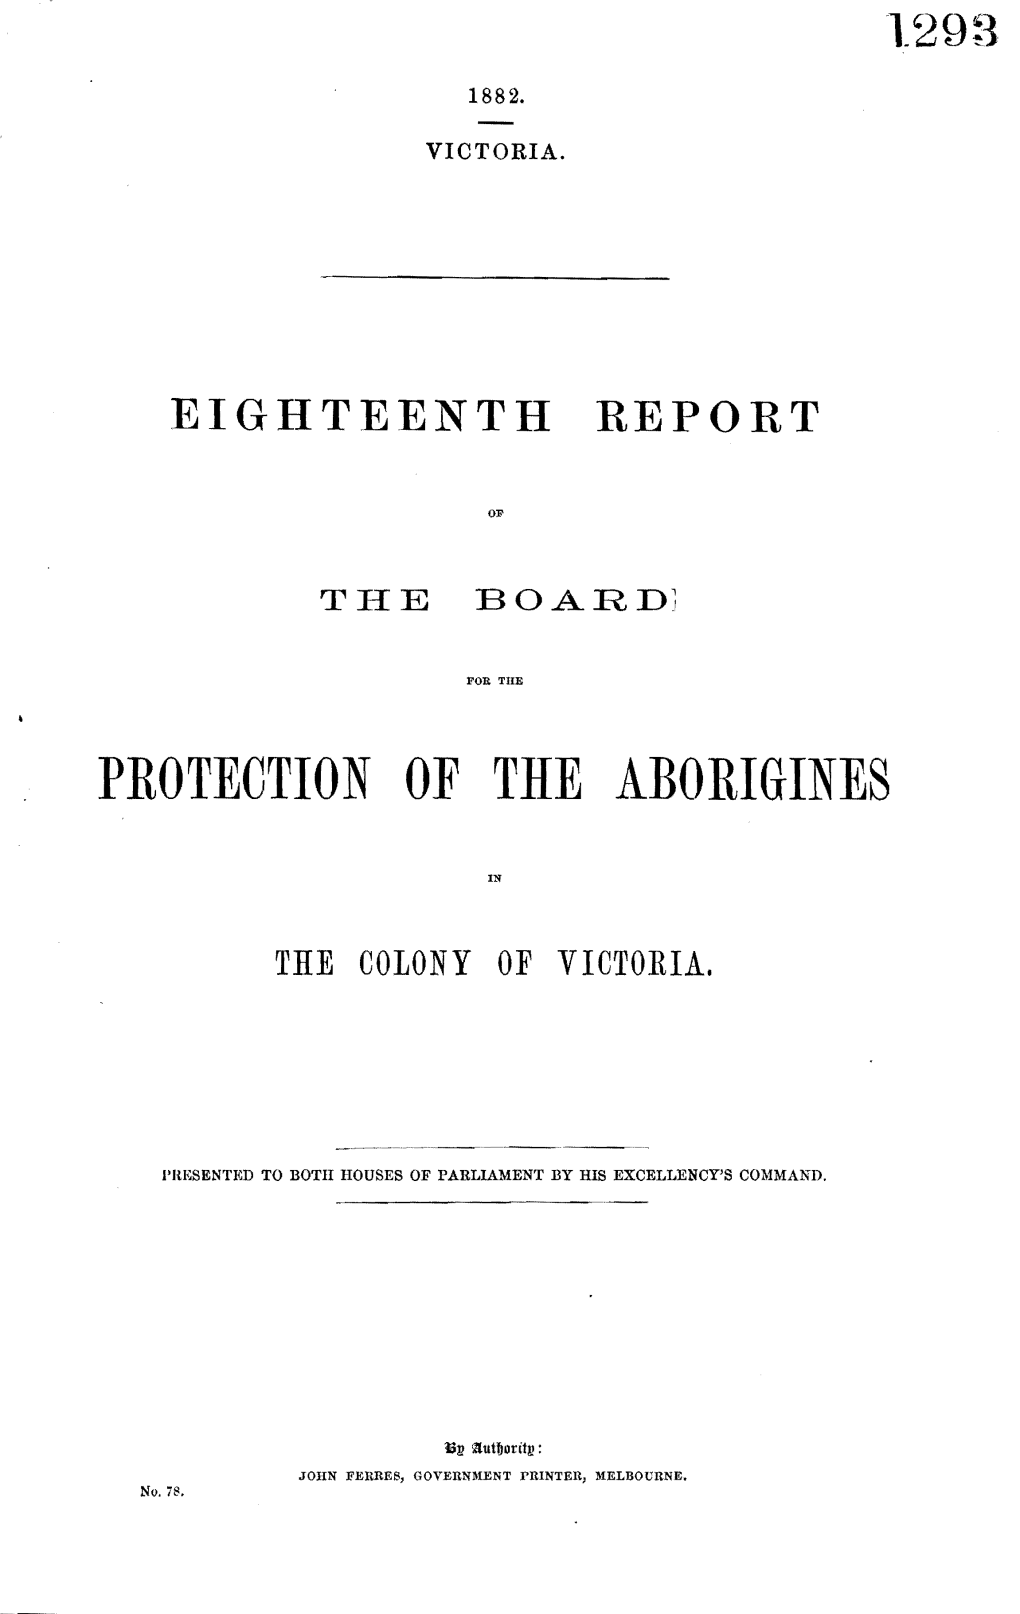 Protection of the Aborigines